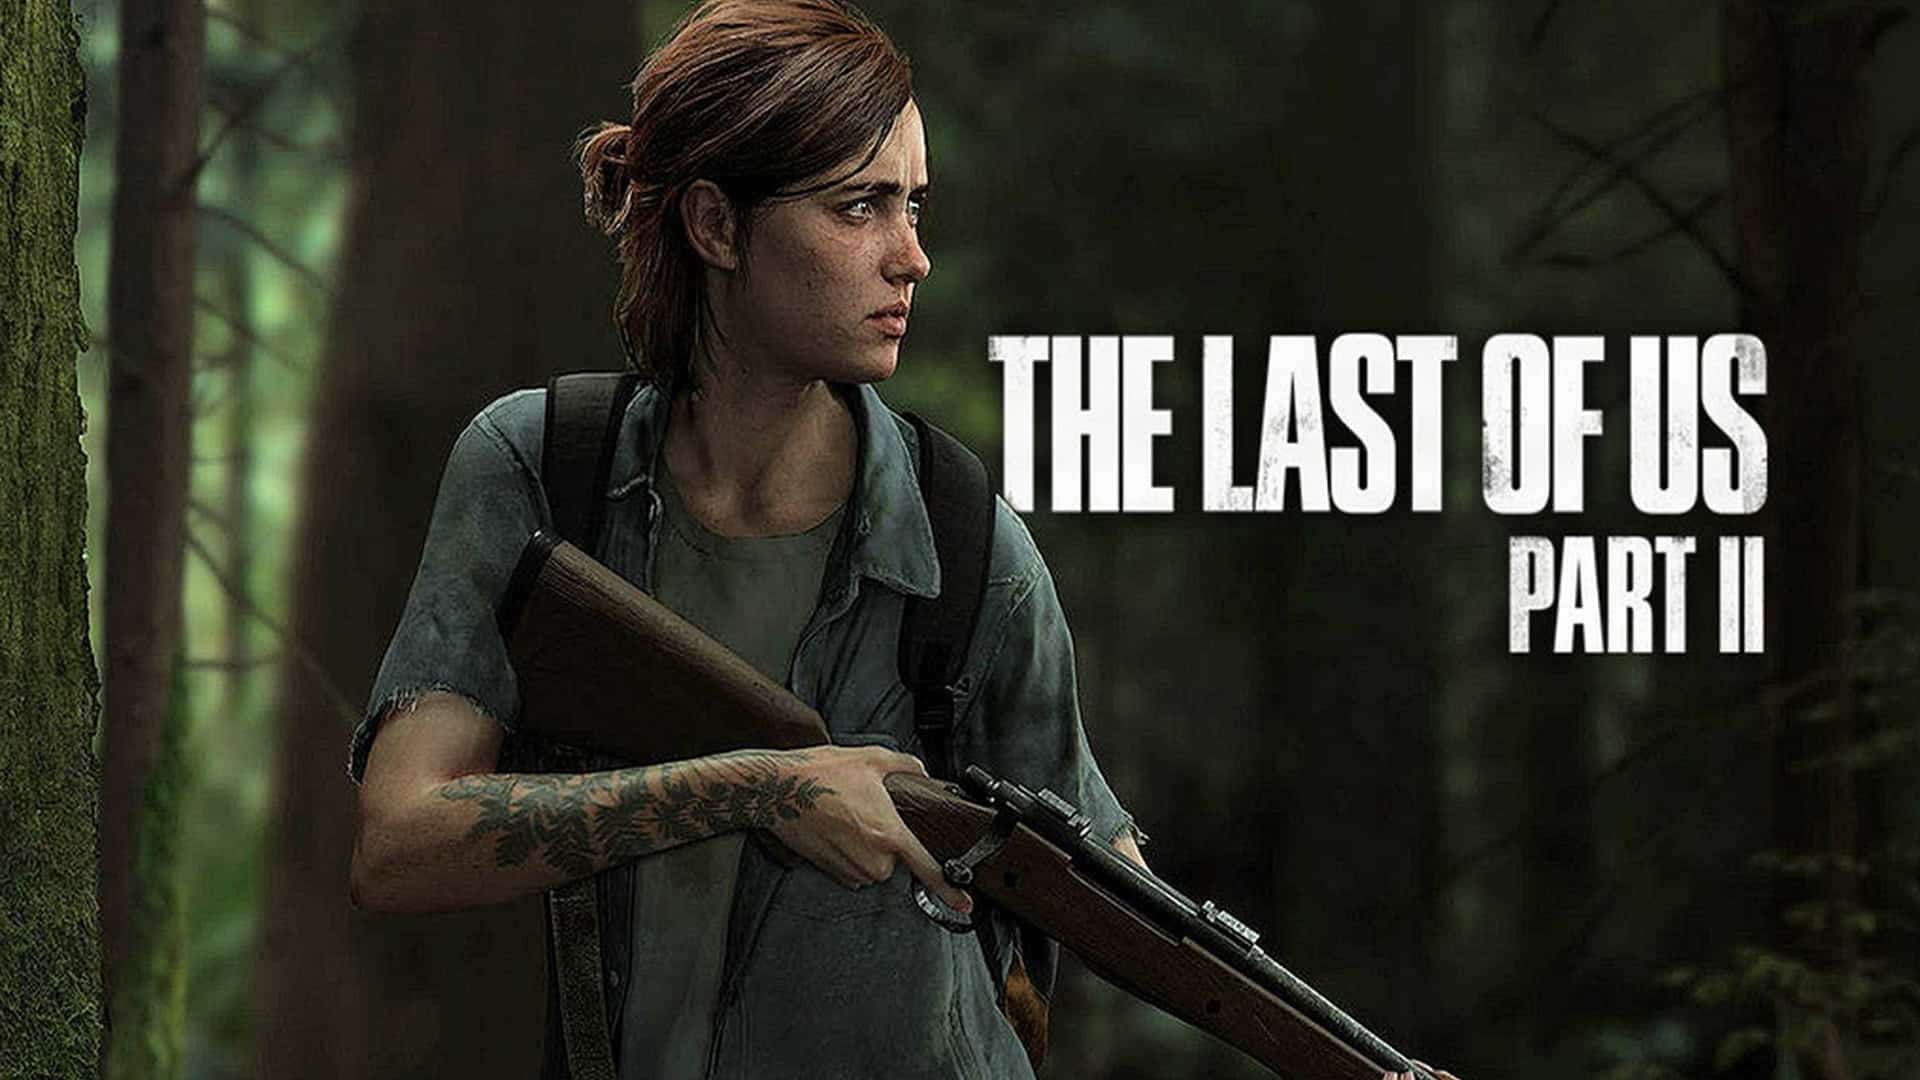 Is she come soon. The last of us игра 1 часть.